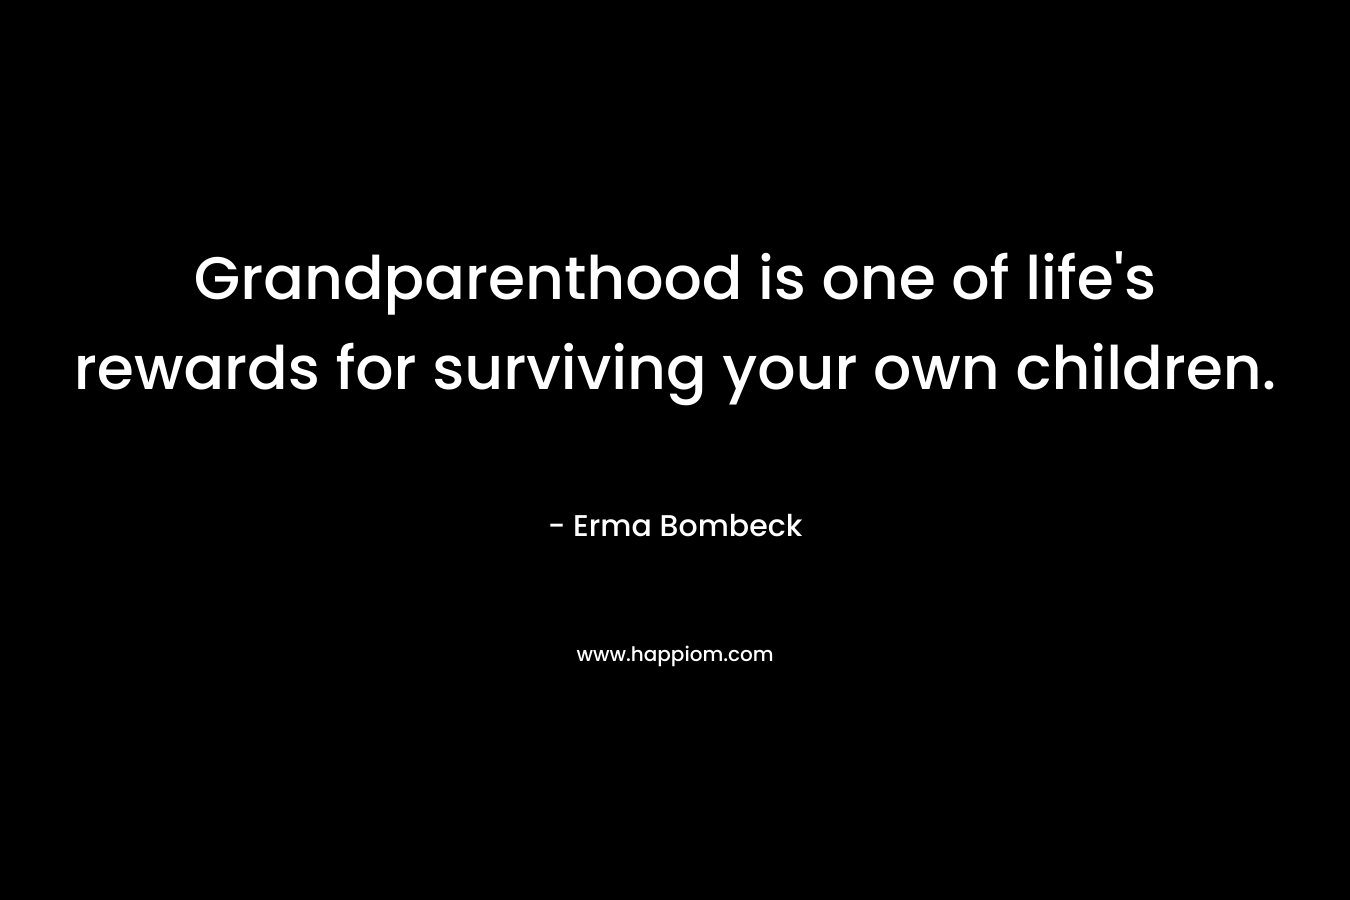 Grandparenthood is one of life’s rewards for surviving your own children. – Erma Bombeck